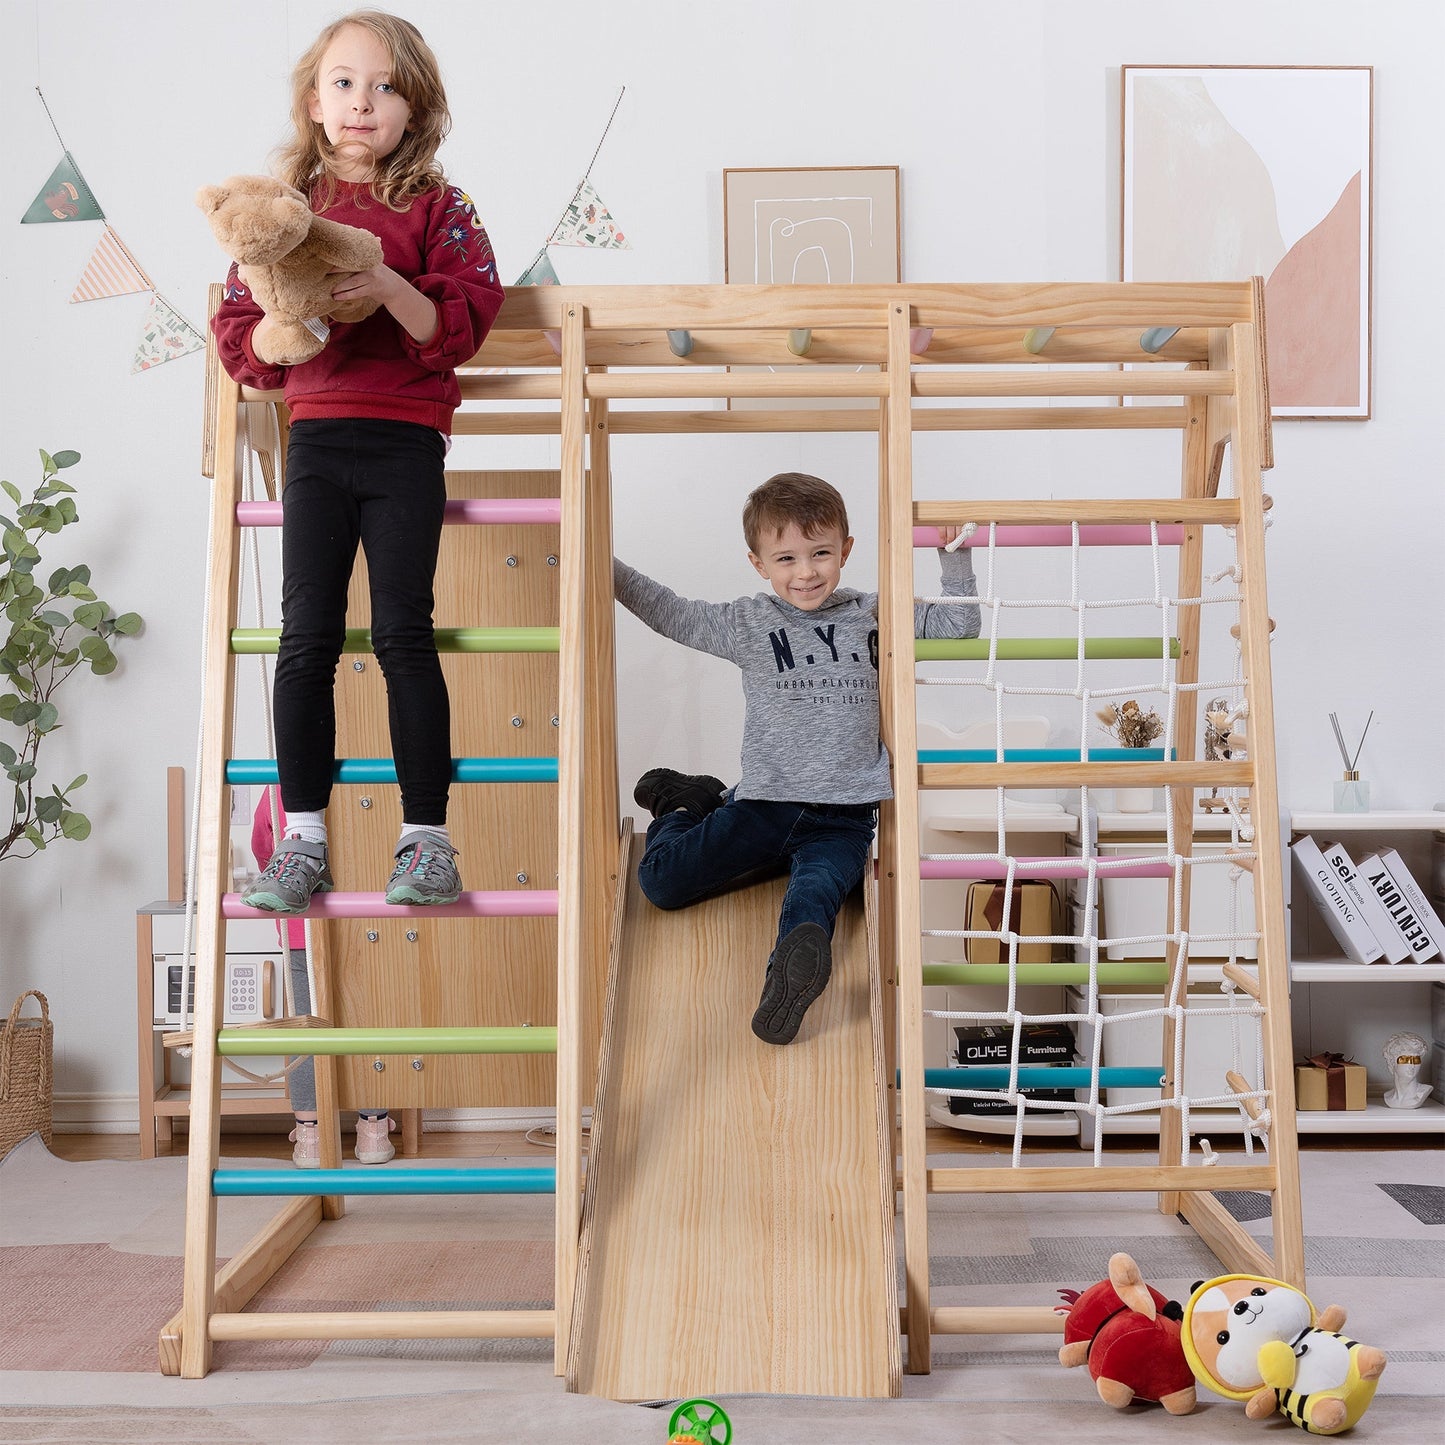 Magnolia - Real Wood 7-in-1 Playset by Avenlur